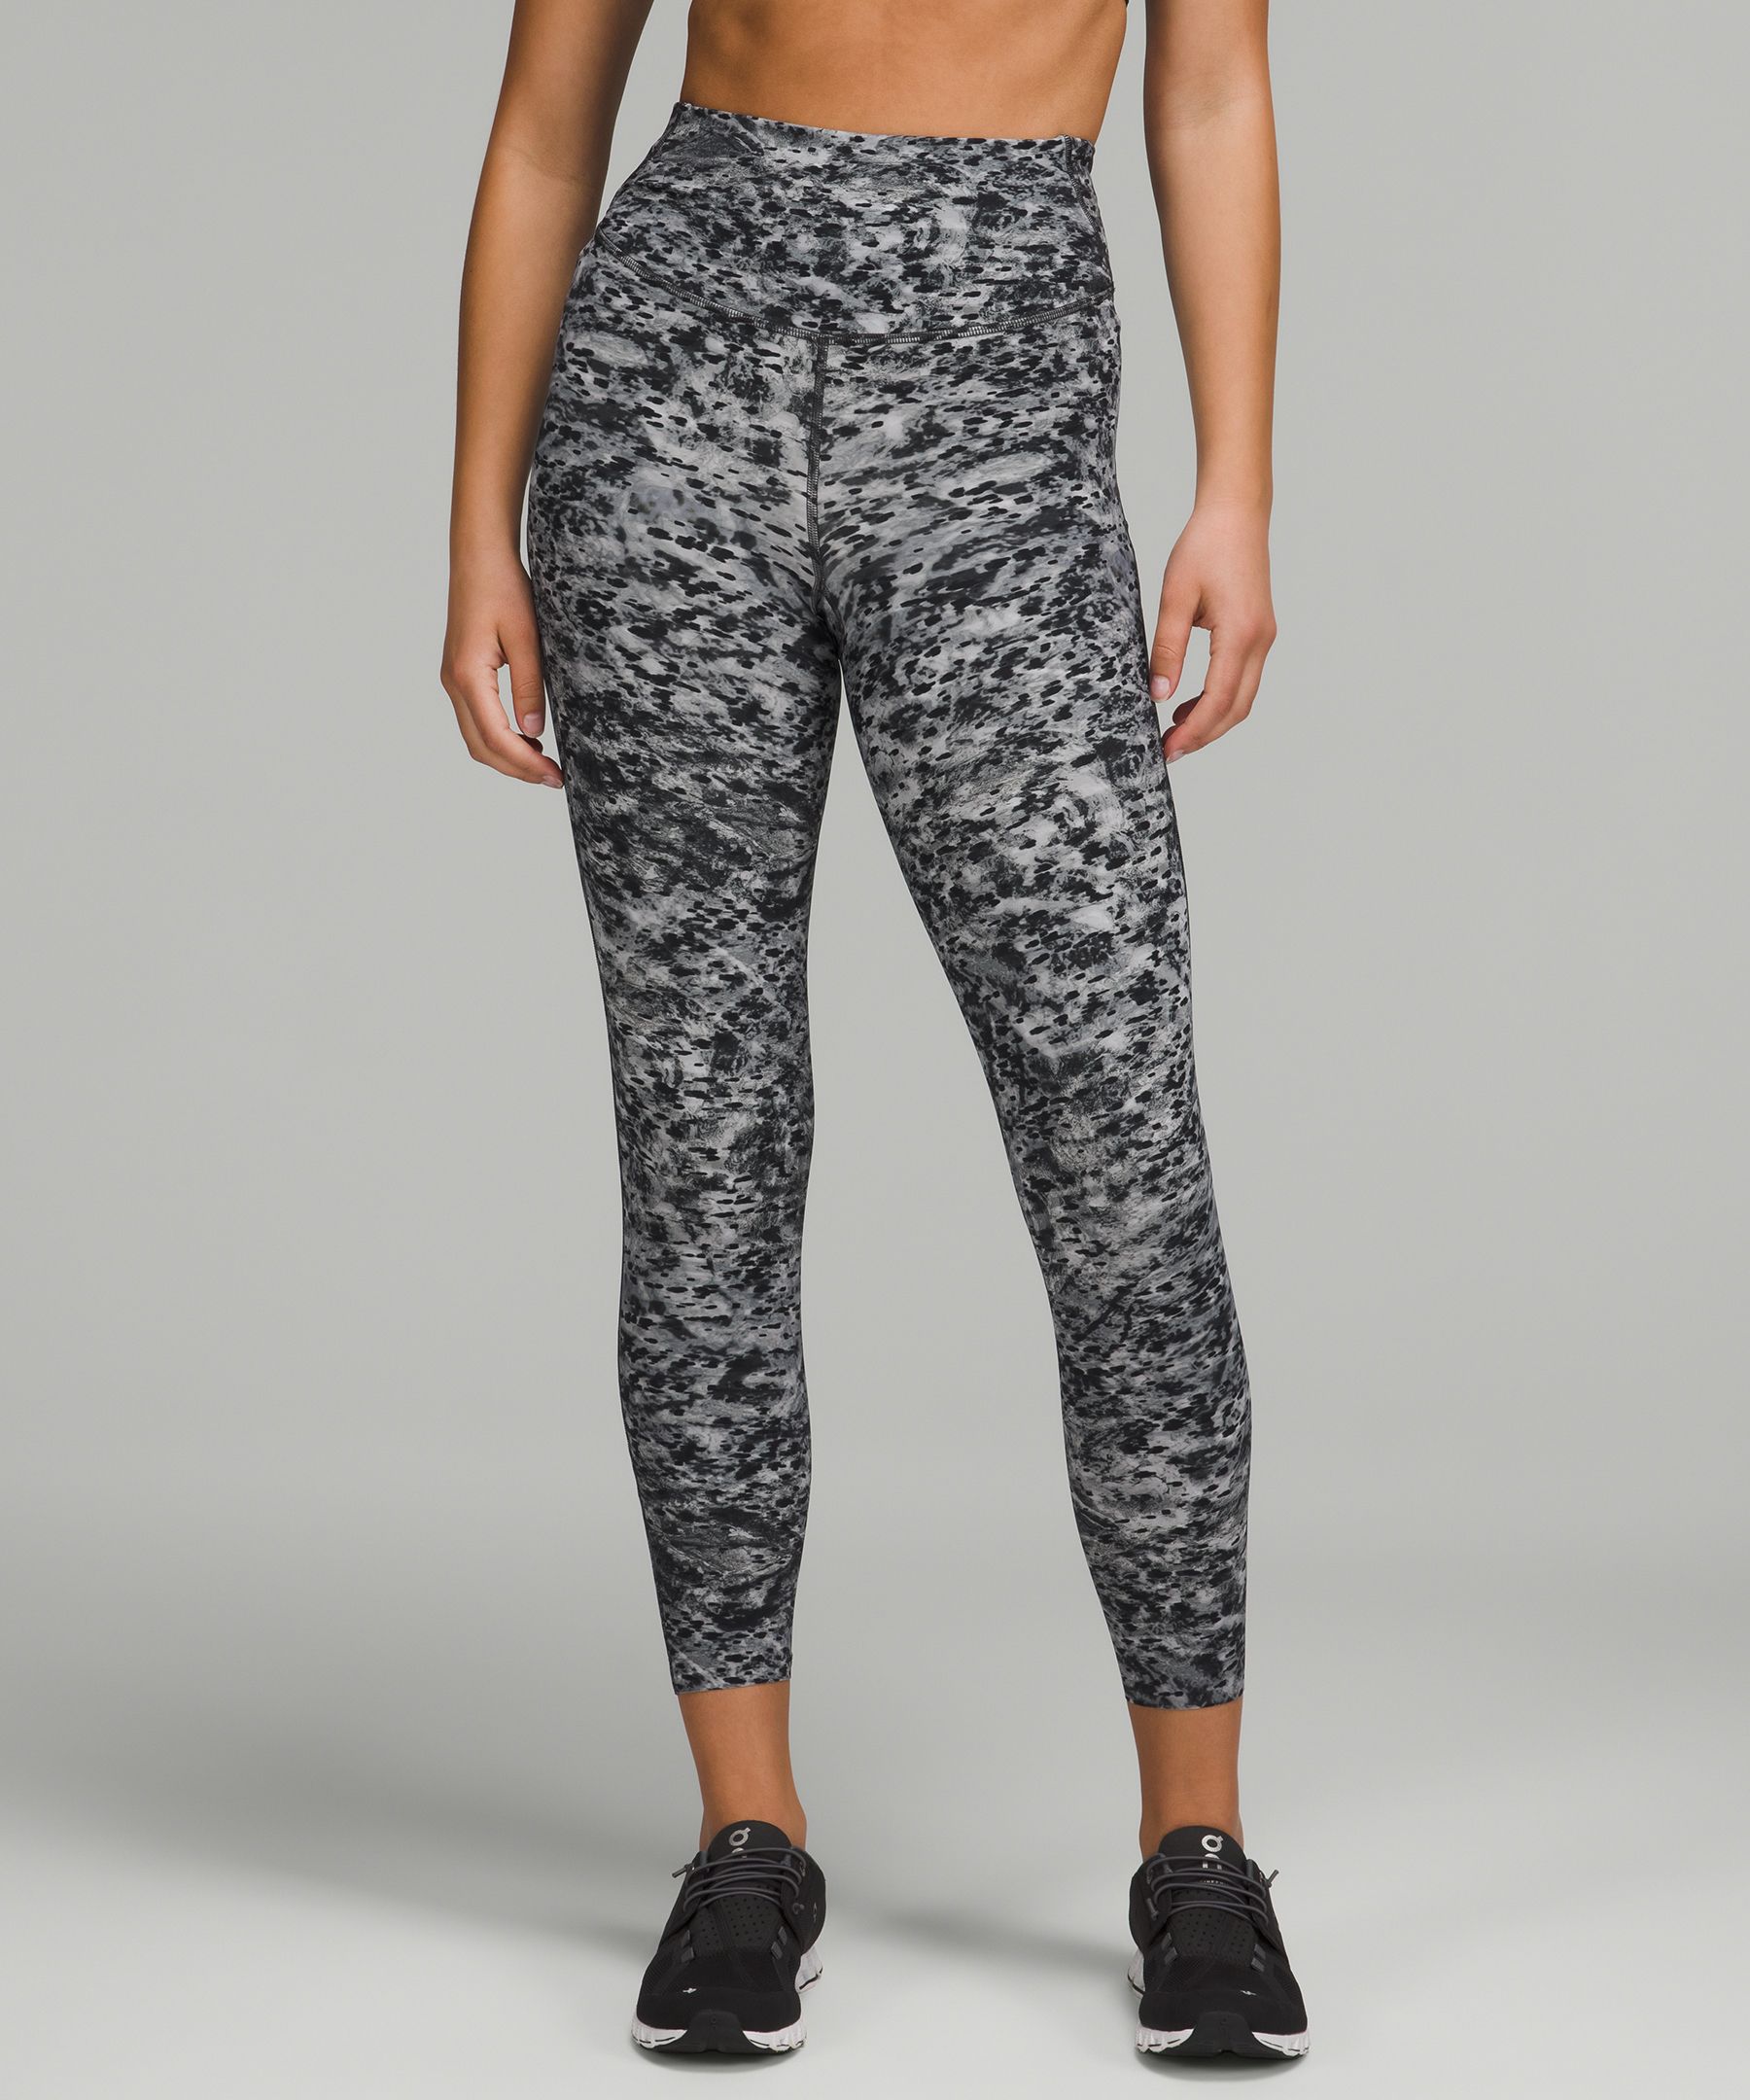 Lululemon Base Pace High-rise Running Tights 25" In Estuary Grey